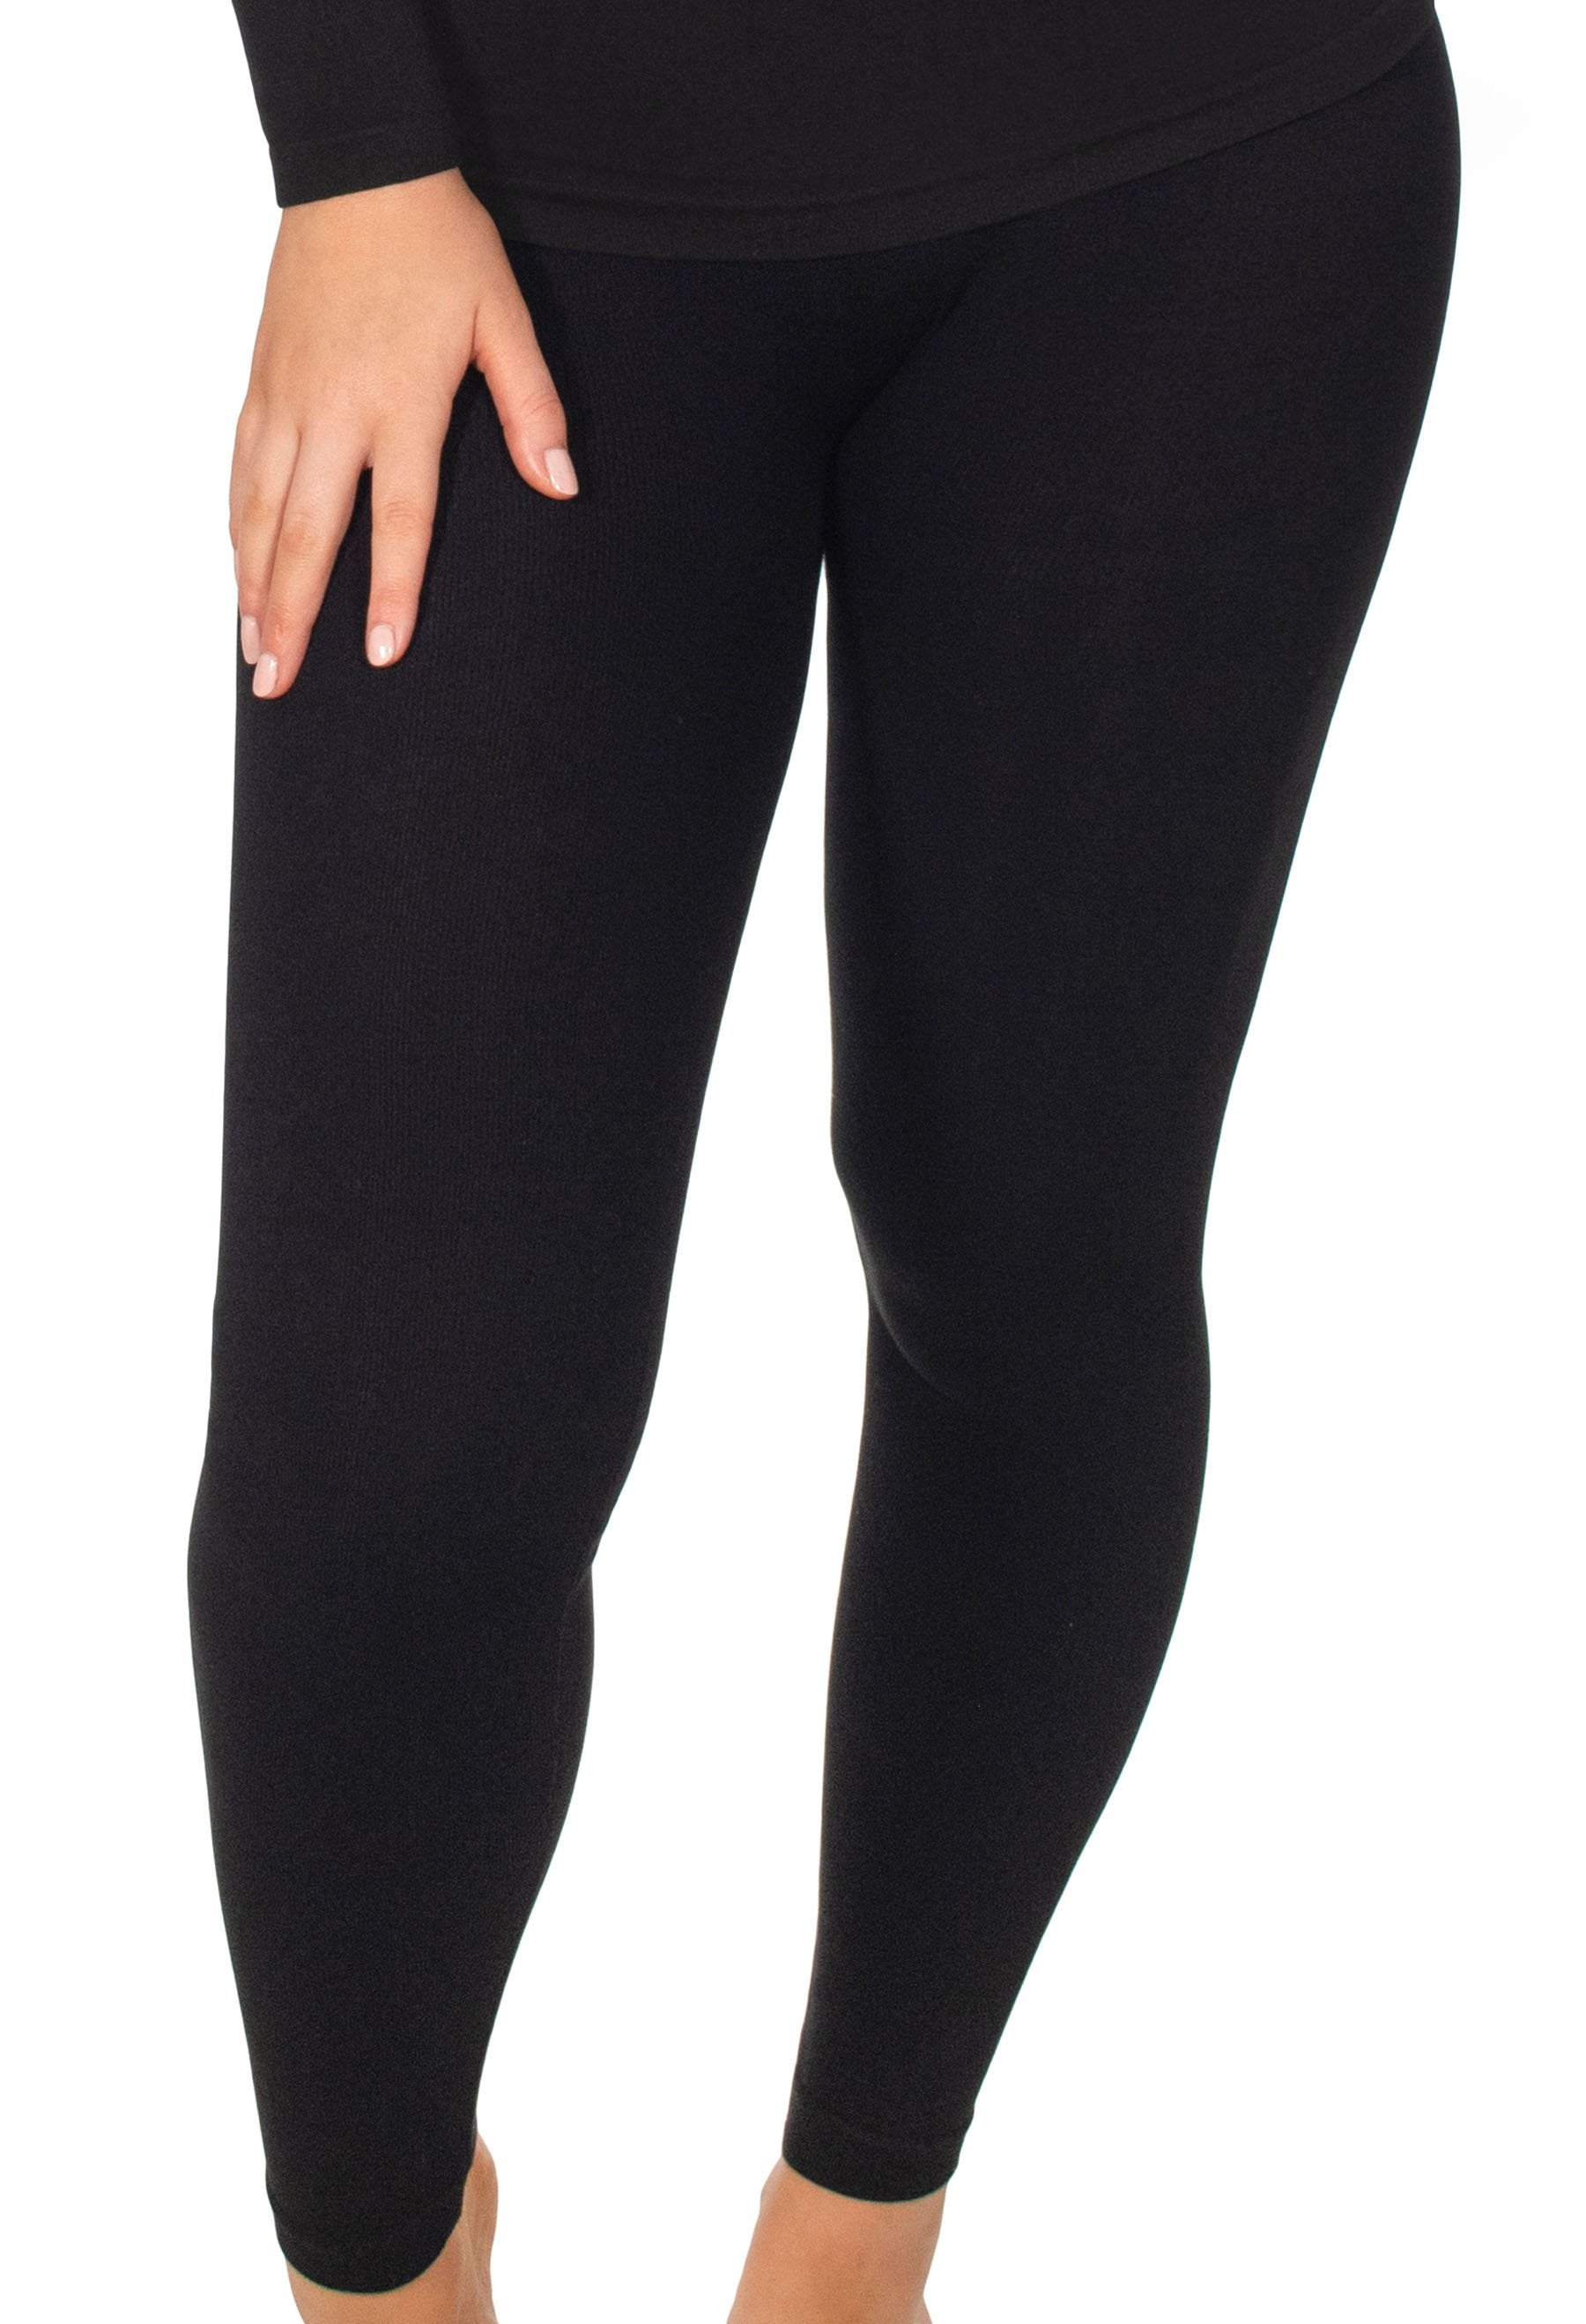 WOMENS TUMMY CONTROL LEGGINGS THICK WITH ADDED SUPPORT PLUS SIZE | eBay